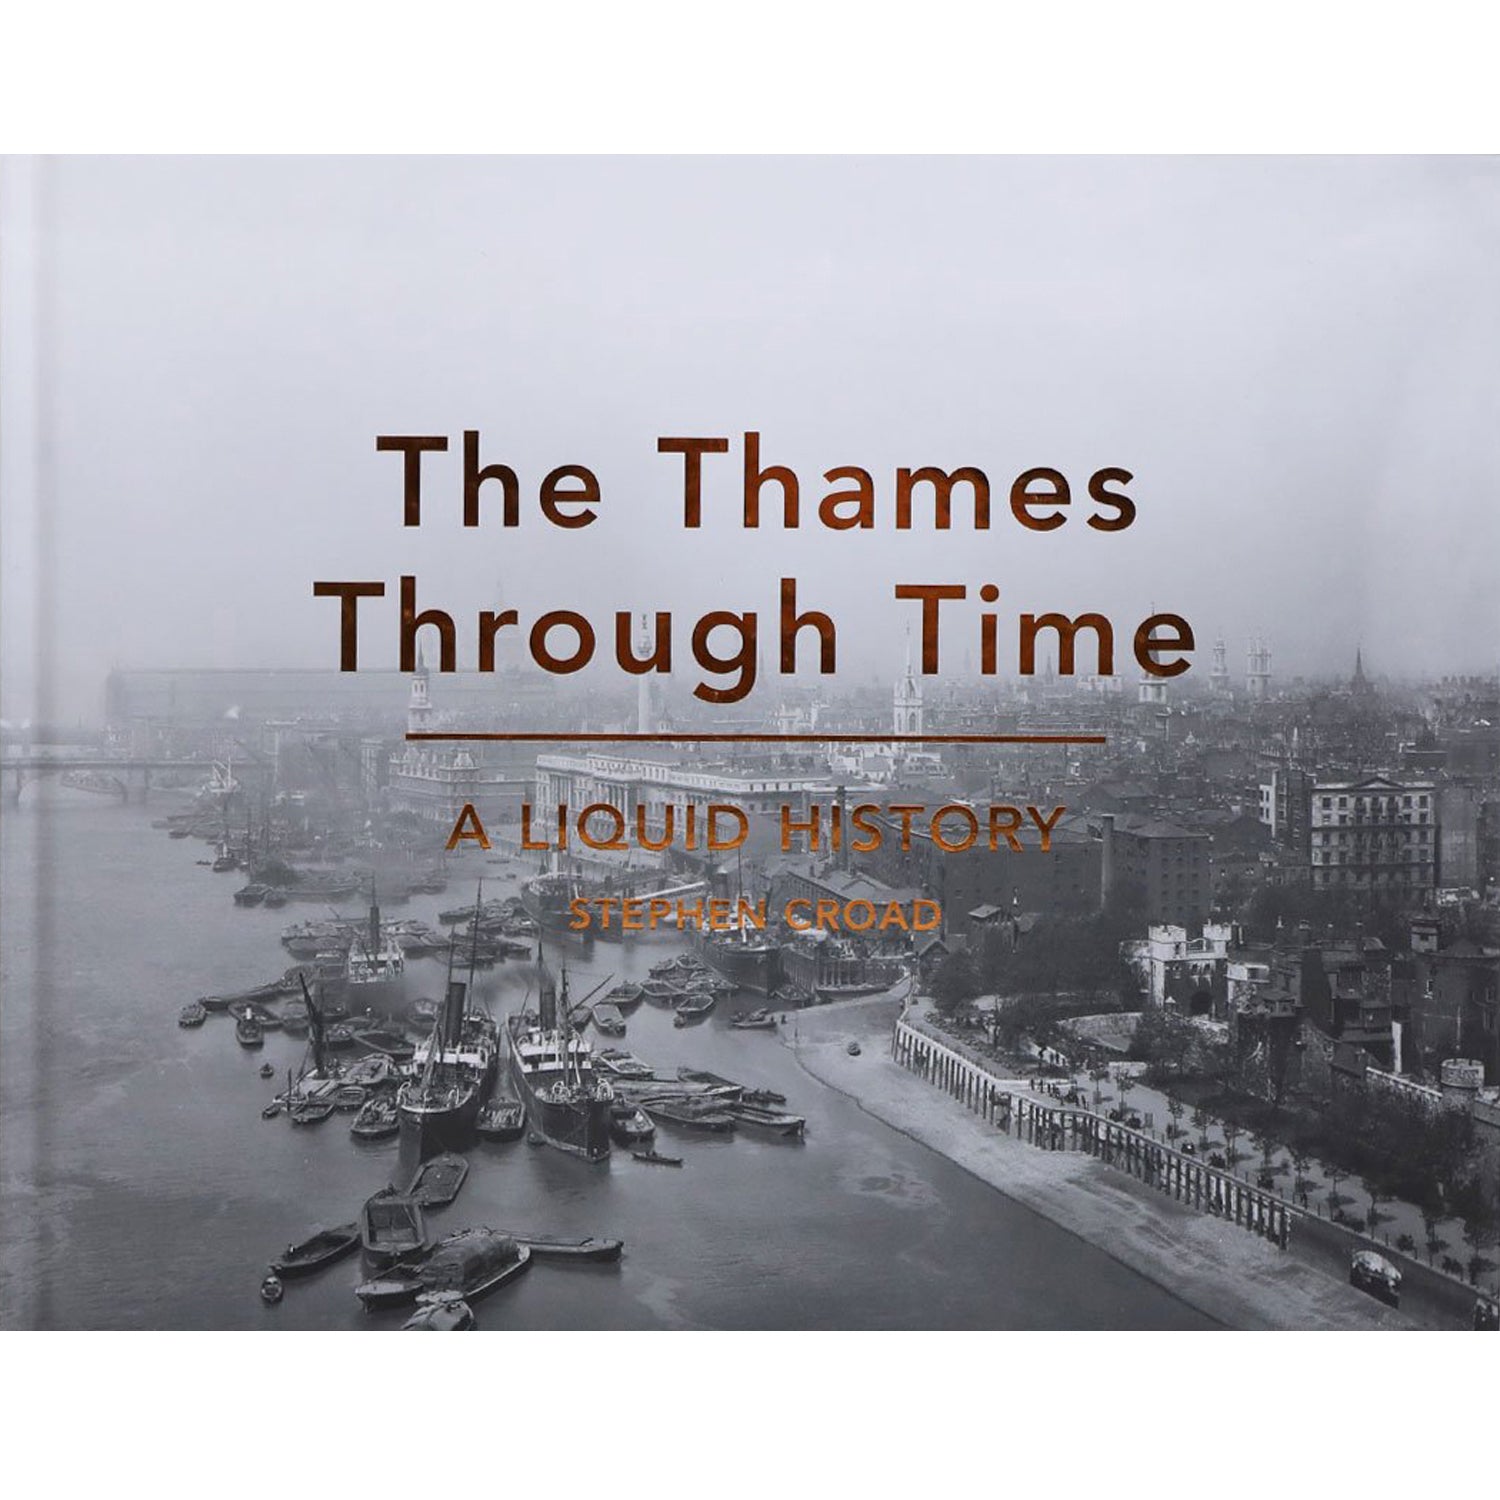 The Thames Through Time book cover